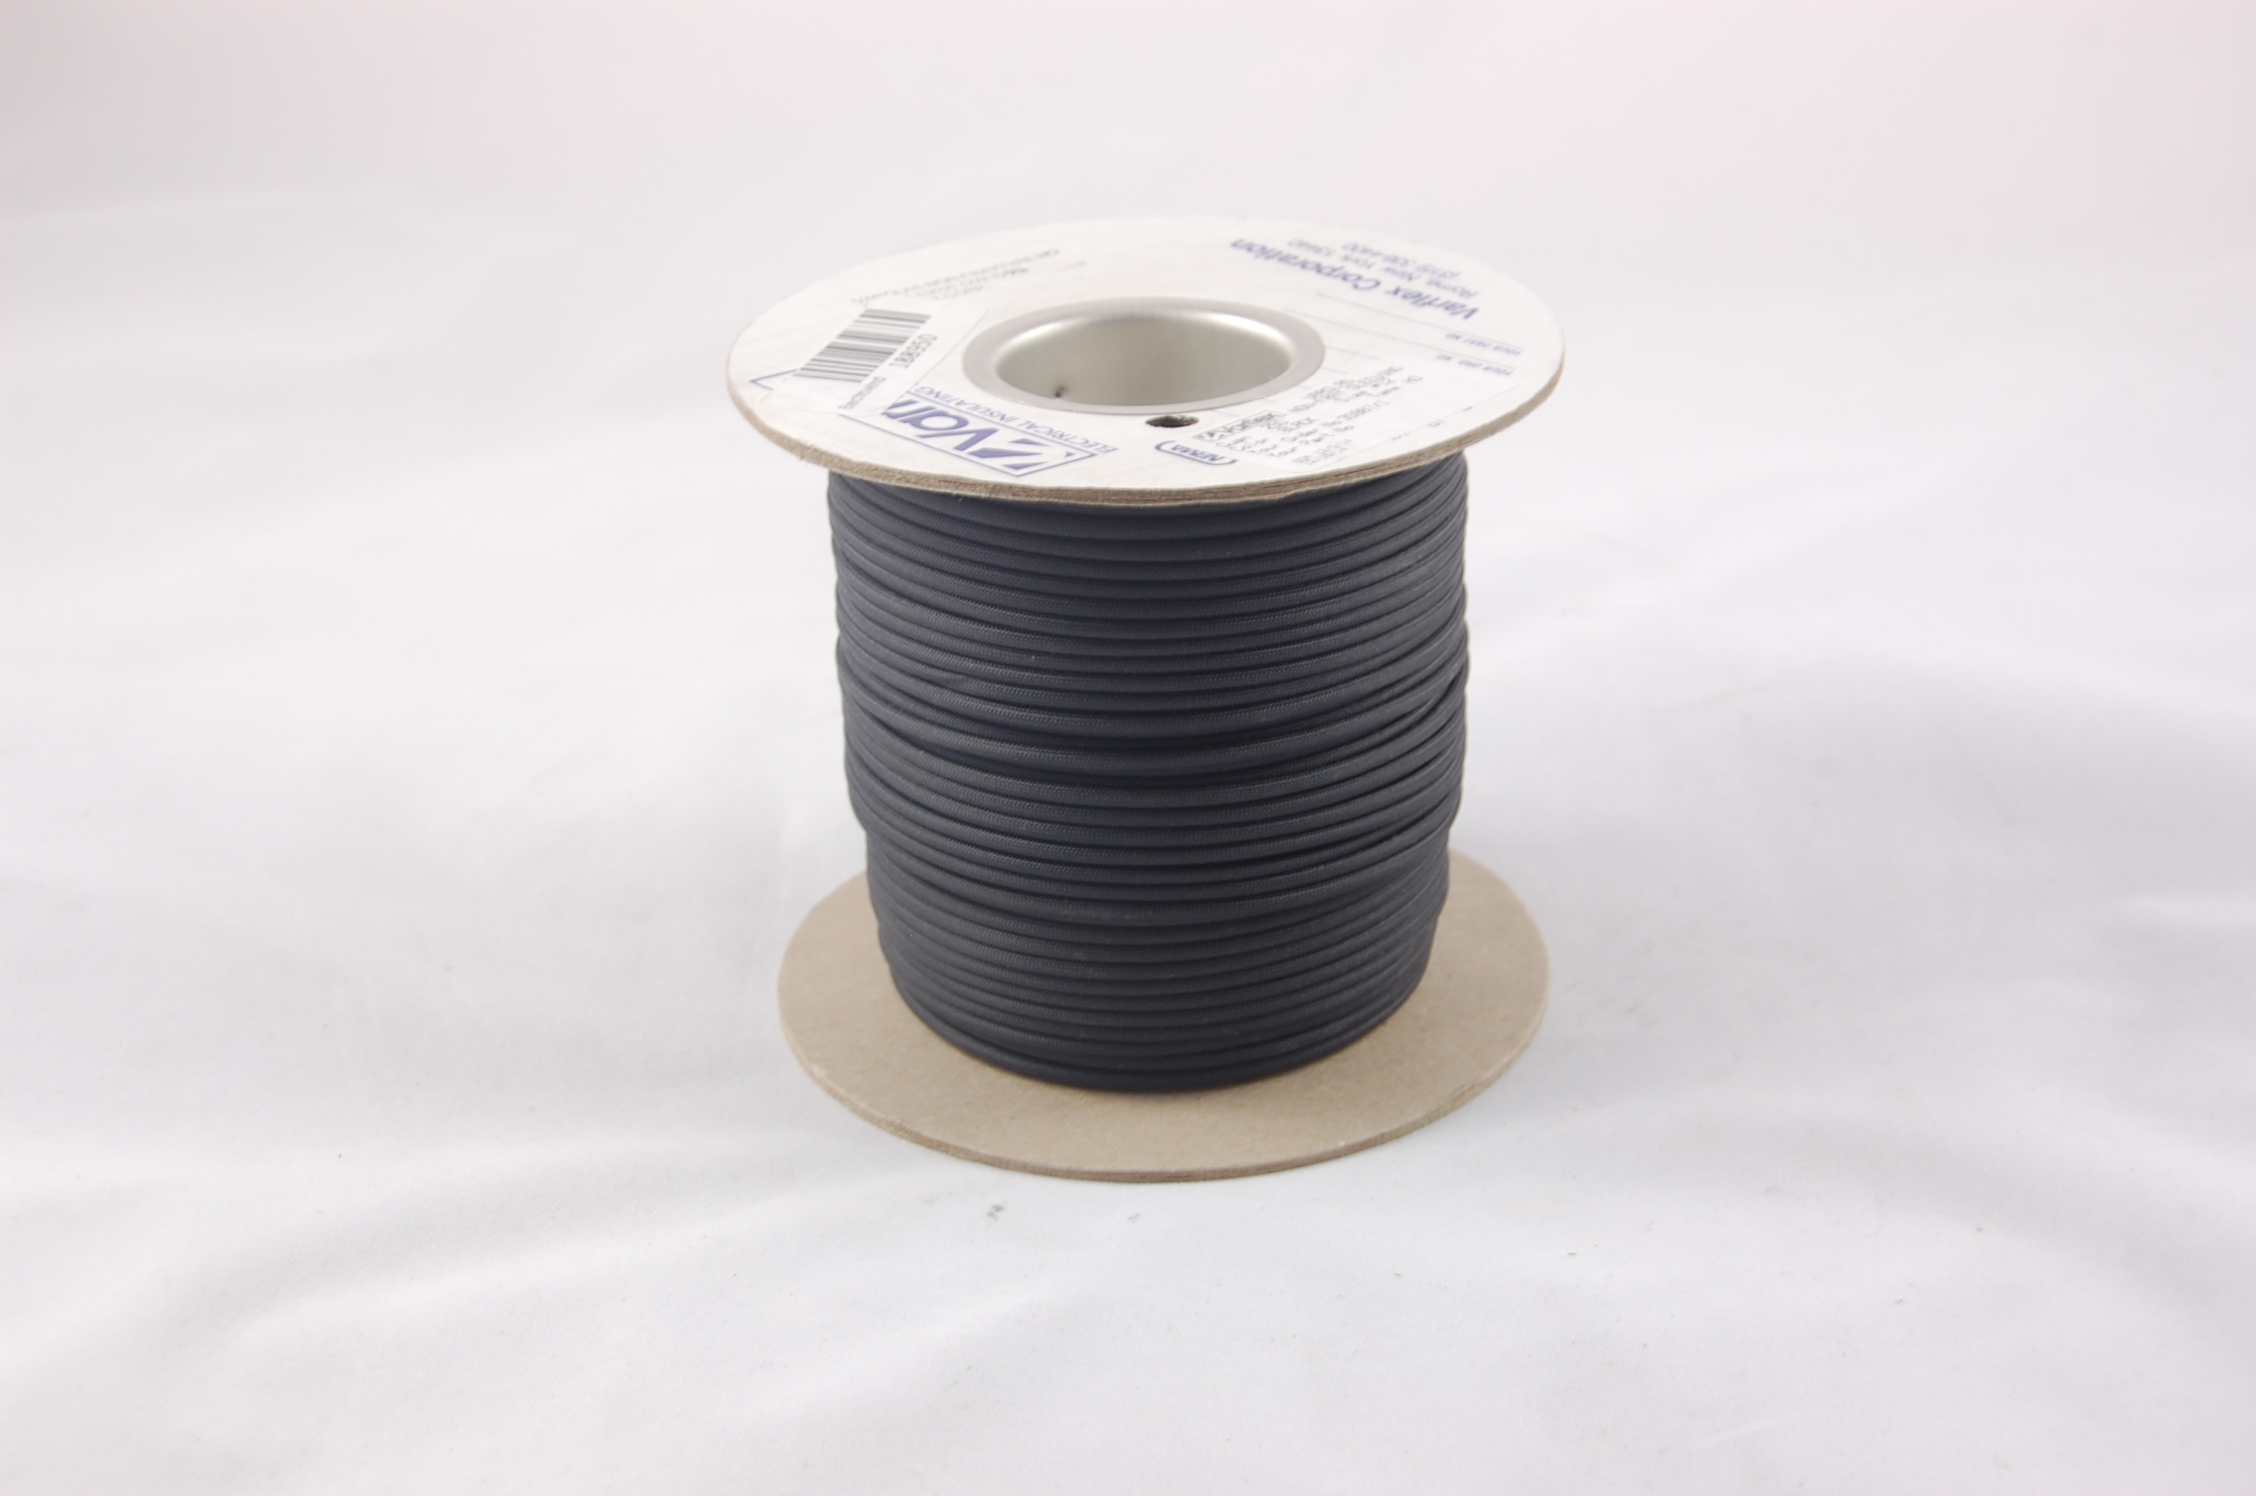 #16 AWG Varglas Type HO Heat-Cleaned and Treated High Temperature Non-Fray Flexible Fiberglass Sleeving , black, 500 FT per spool